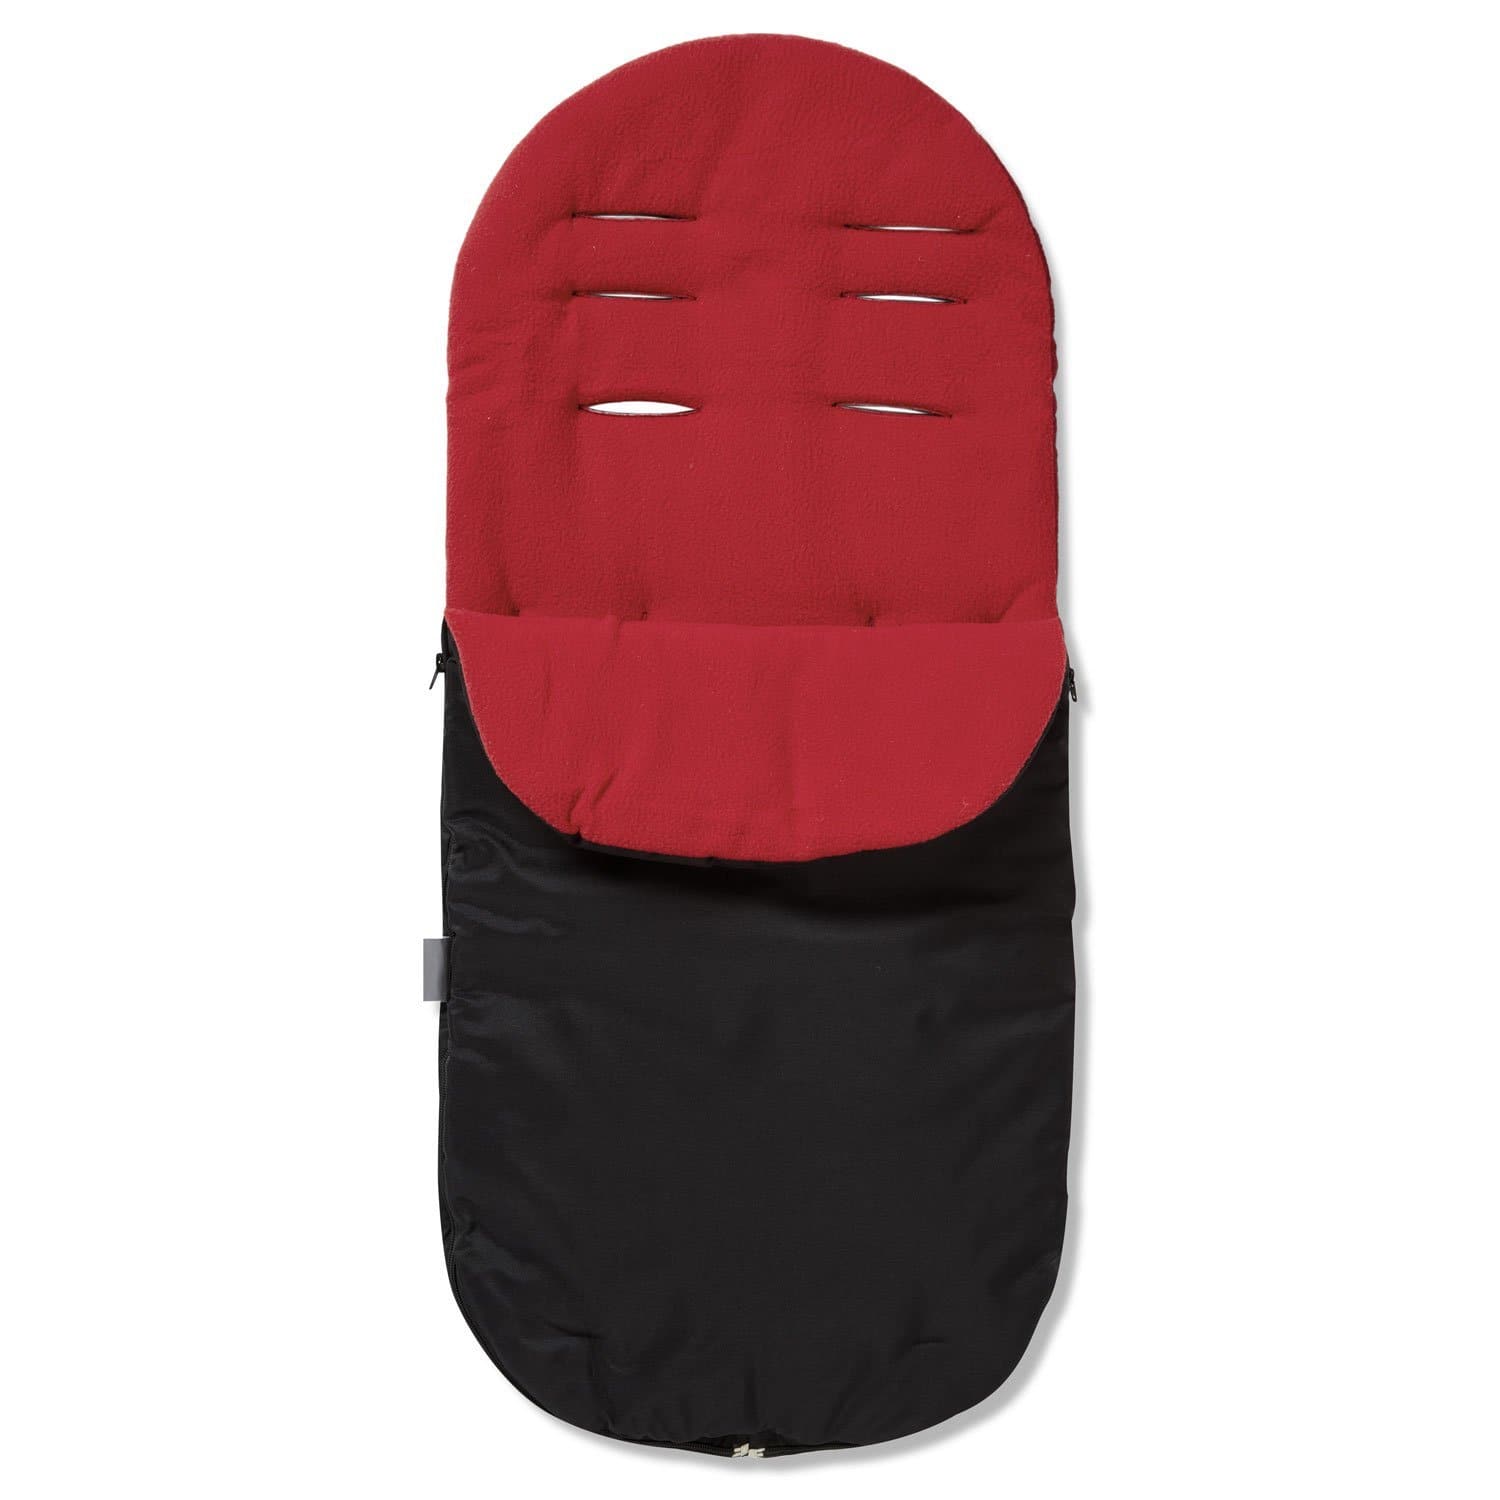 Footmuff / Cosy Toes Compatible with Teutonia - Red / Fits All Models | For Your Little One